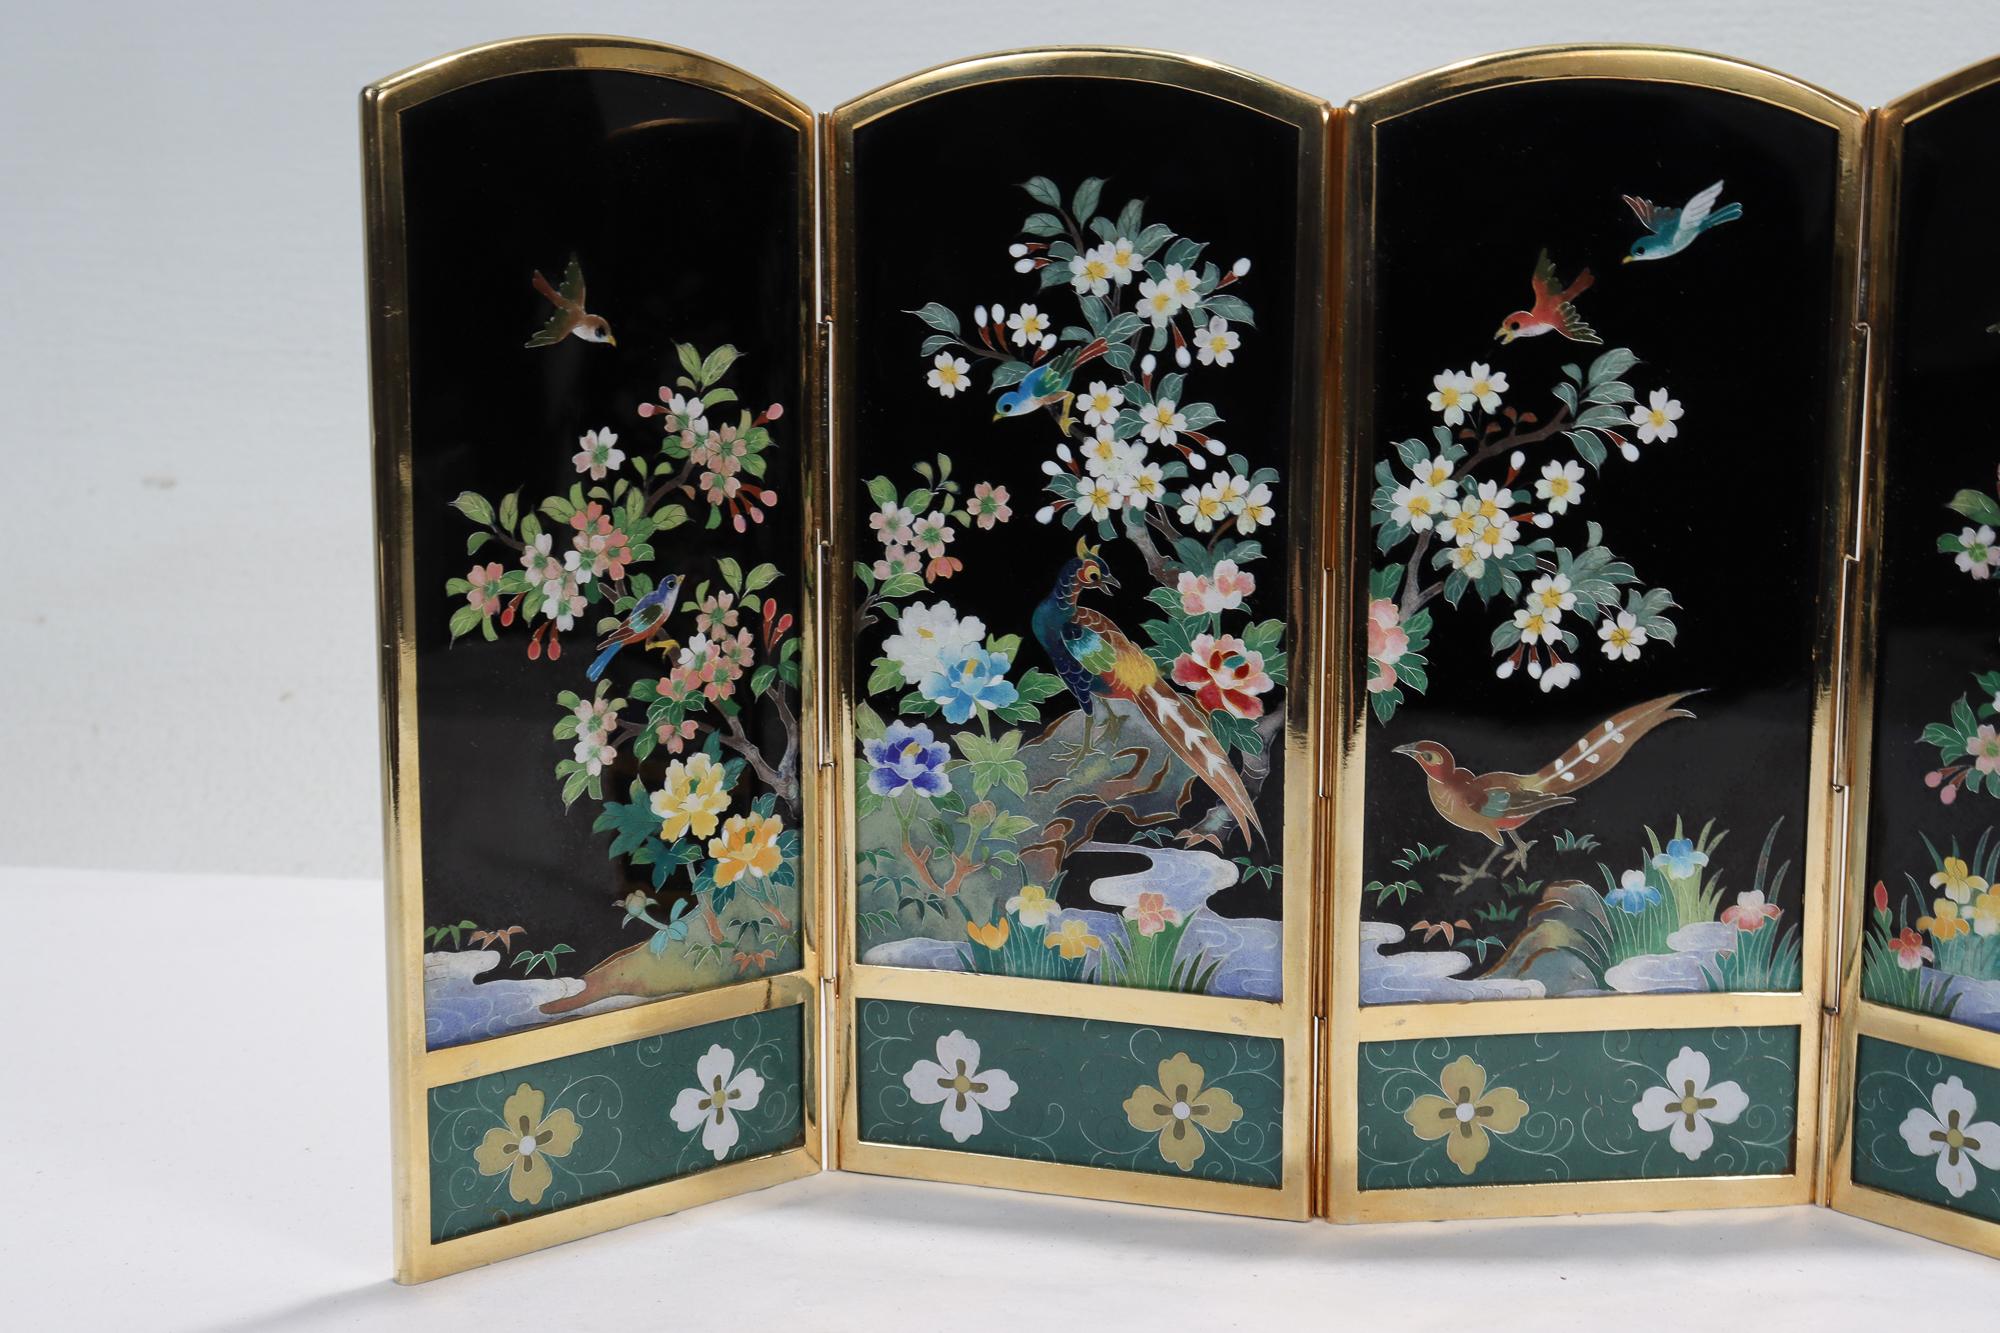 Cloissoné Old or Antique Japanese Inaba Cloisonne Table Screen with Birds & Flowers